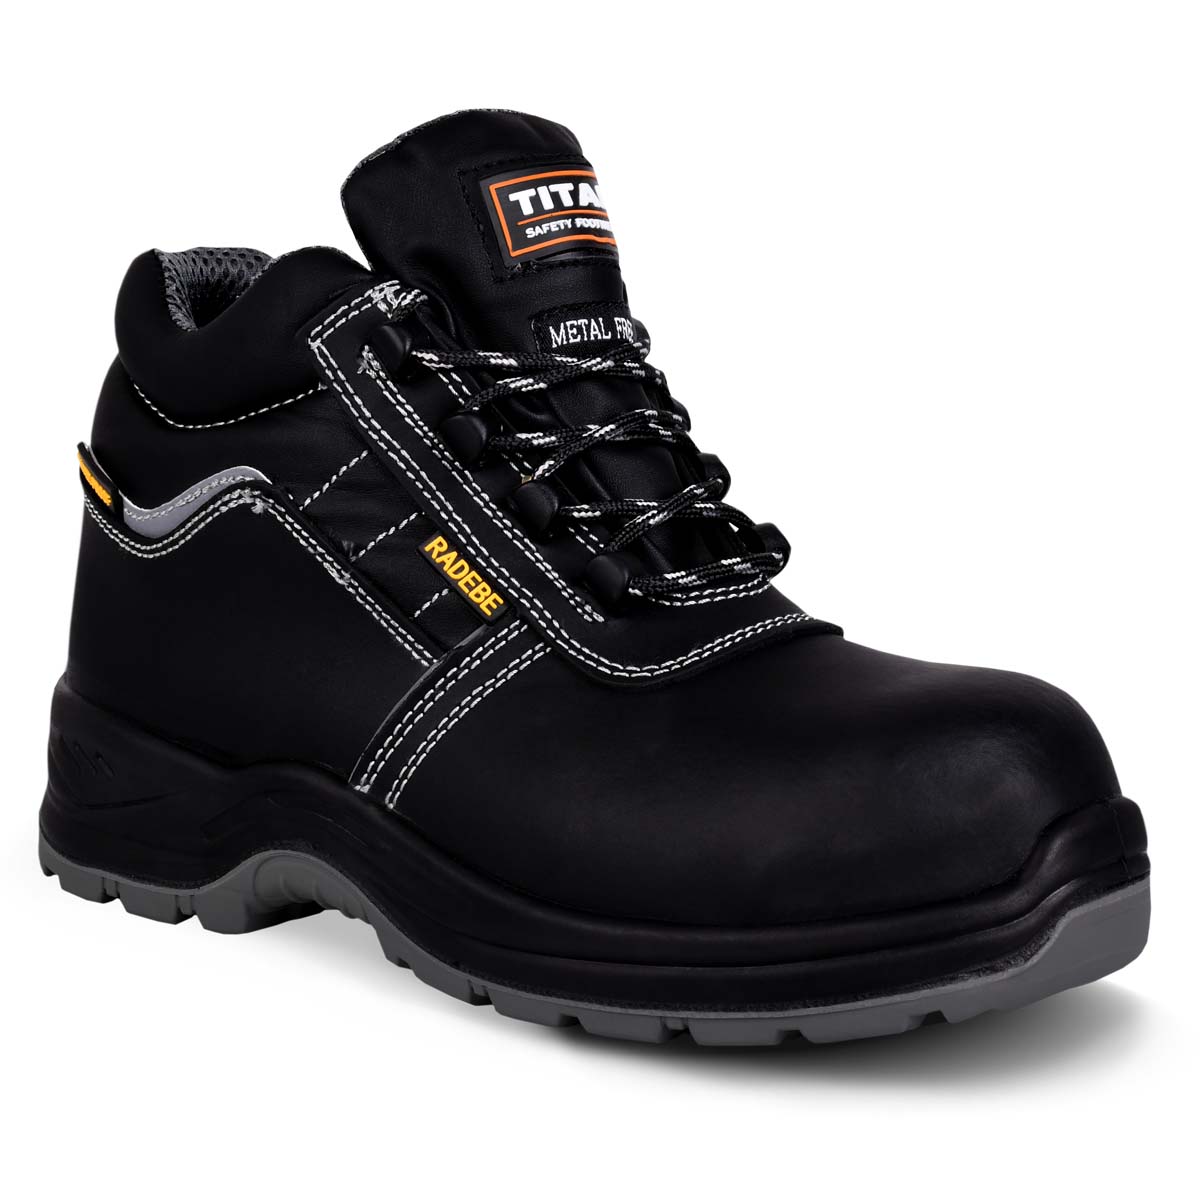 Titan Non Metallic Waterproof Leather Work Safety Boots Composite Toe Cap Sole 